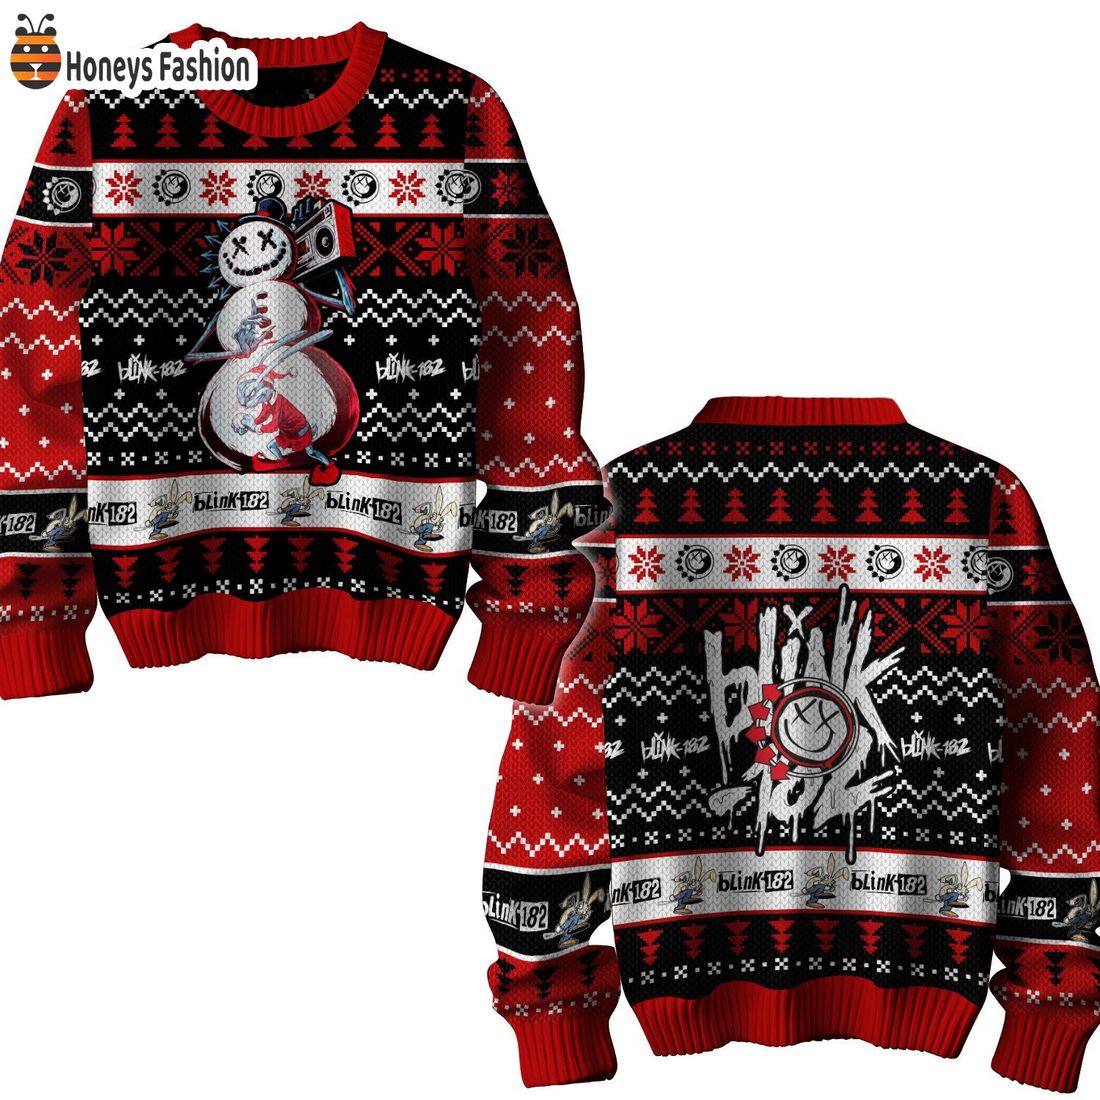 Blink-182 Snow Ugly Christmas Sweater